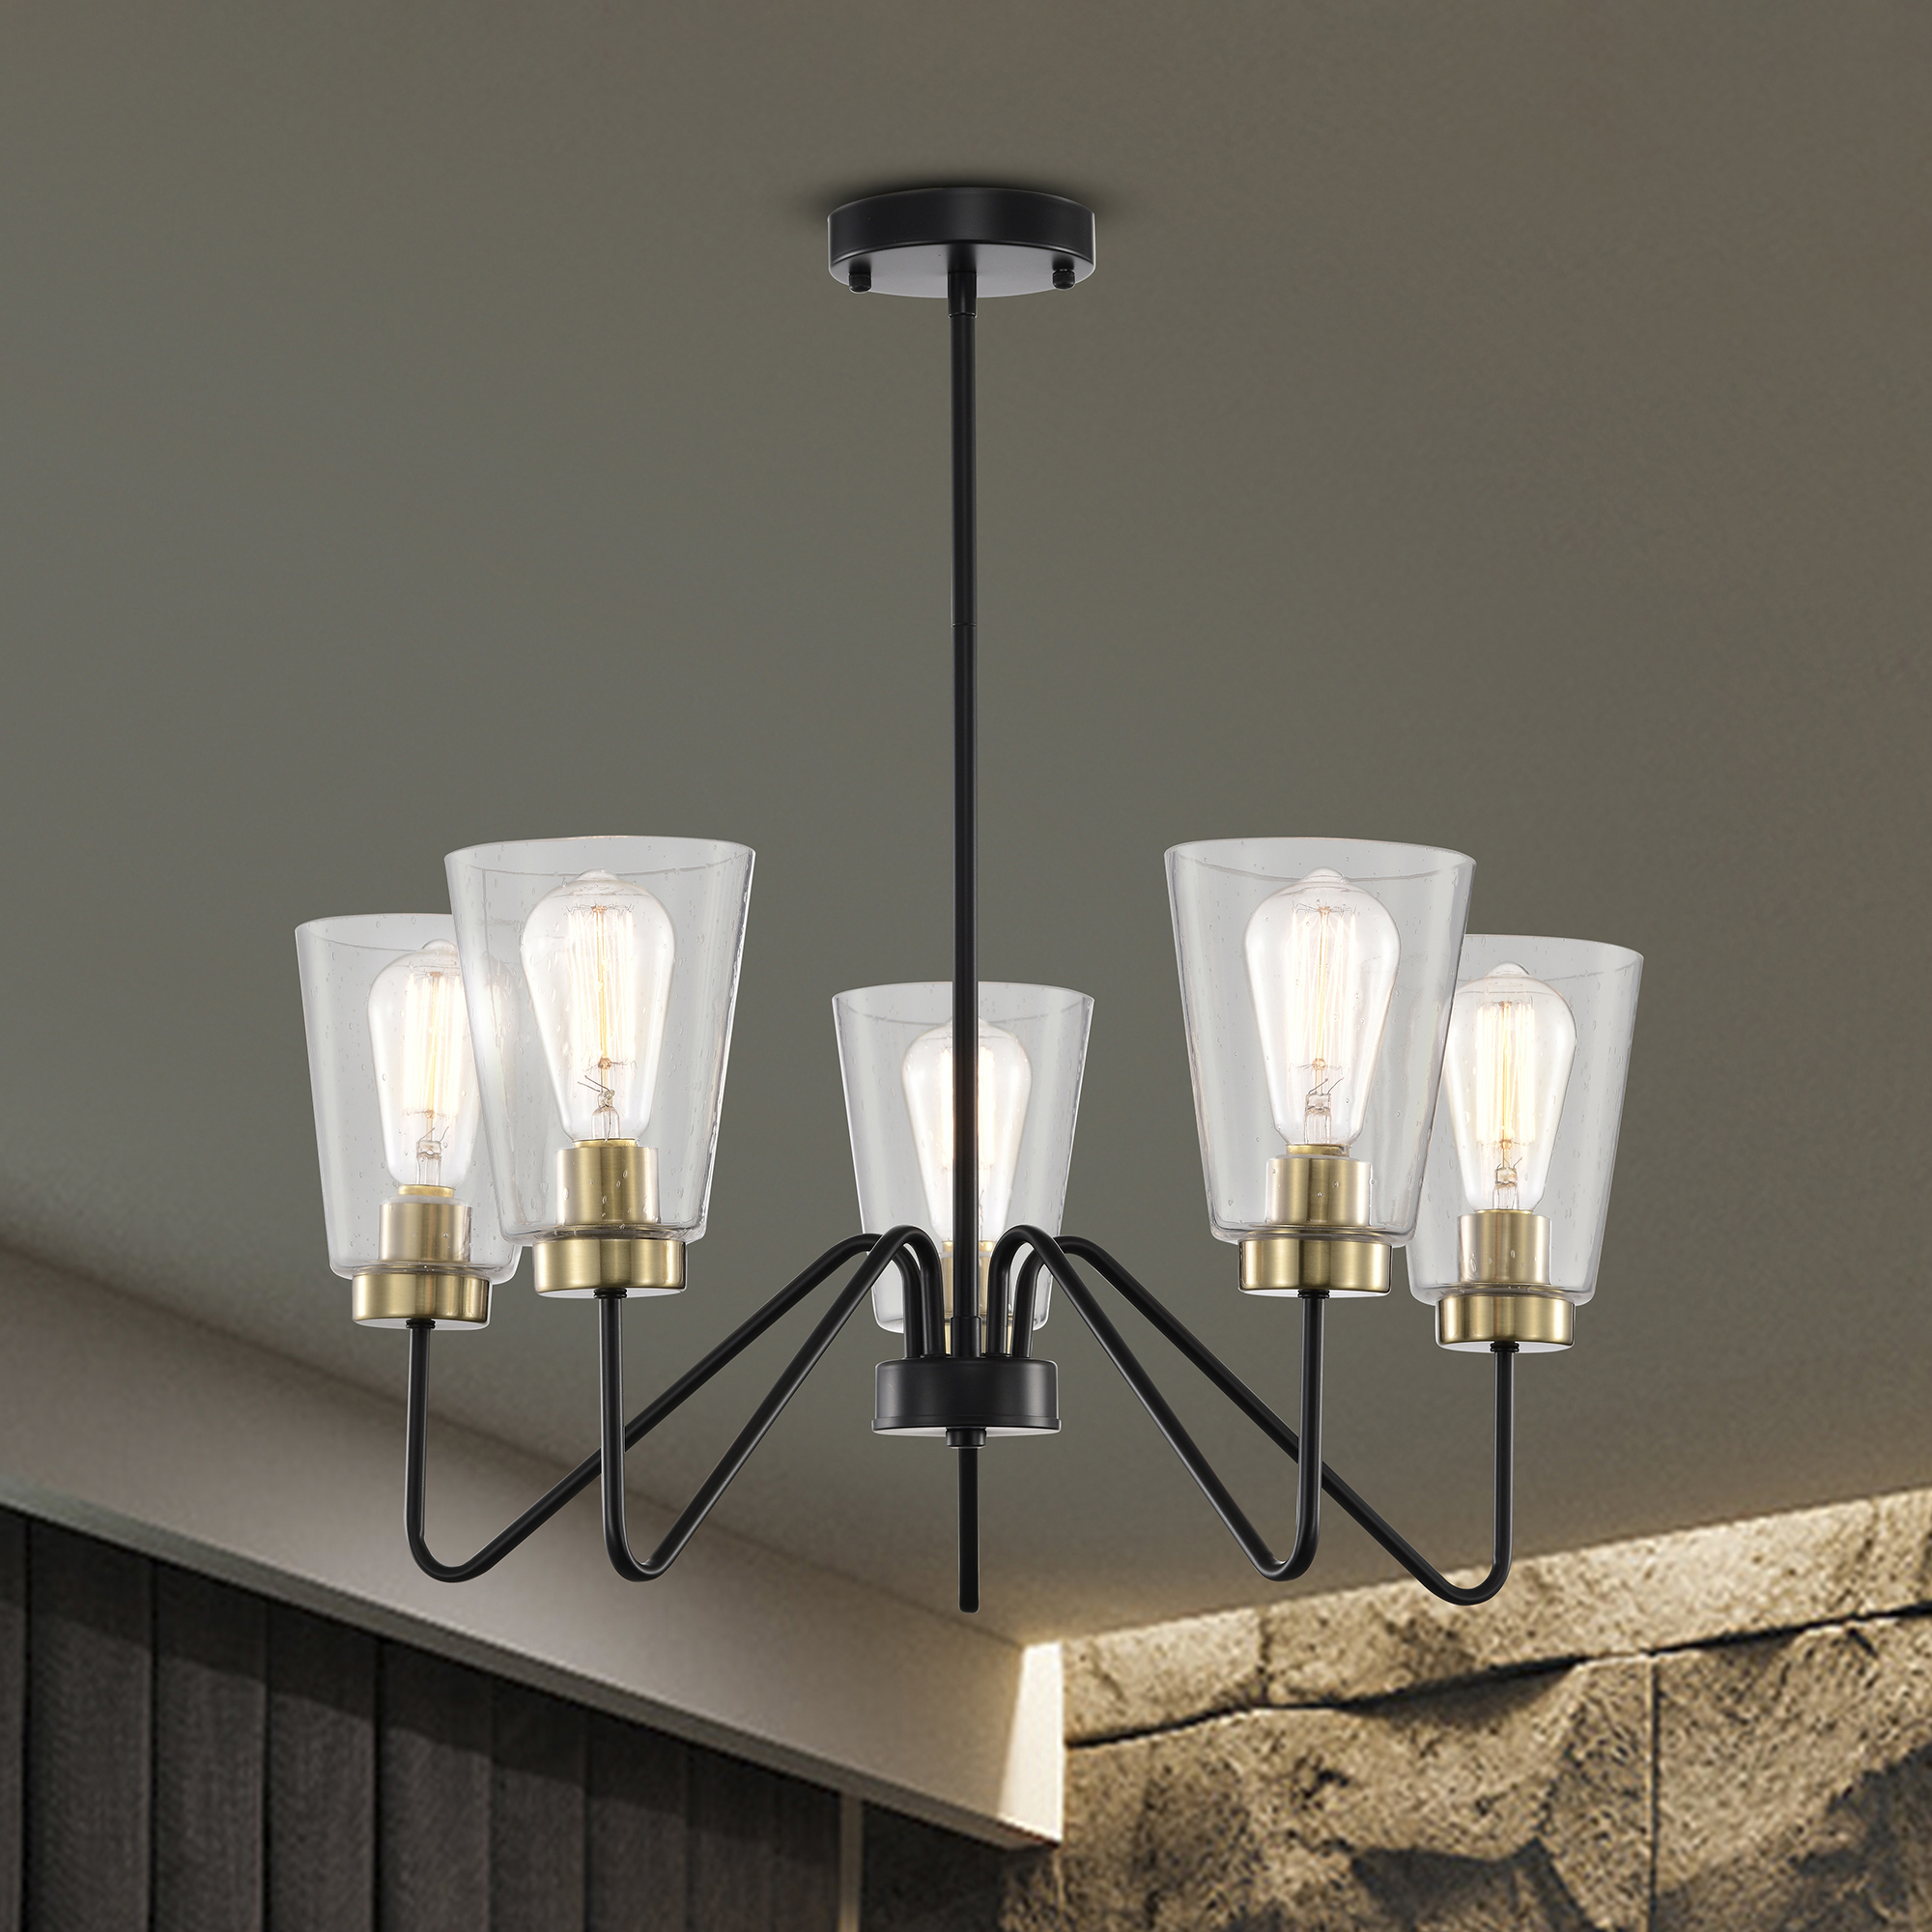 Kendrey 25.1 in. 5-Light Indoor Matte black and Brass Finish Chandelier with Light Kit